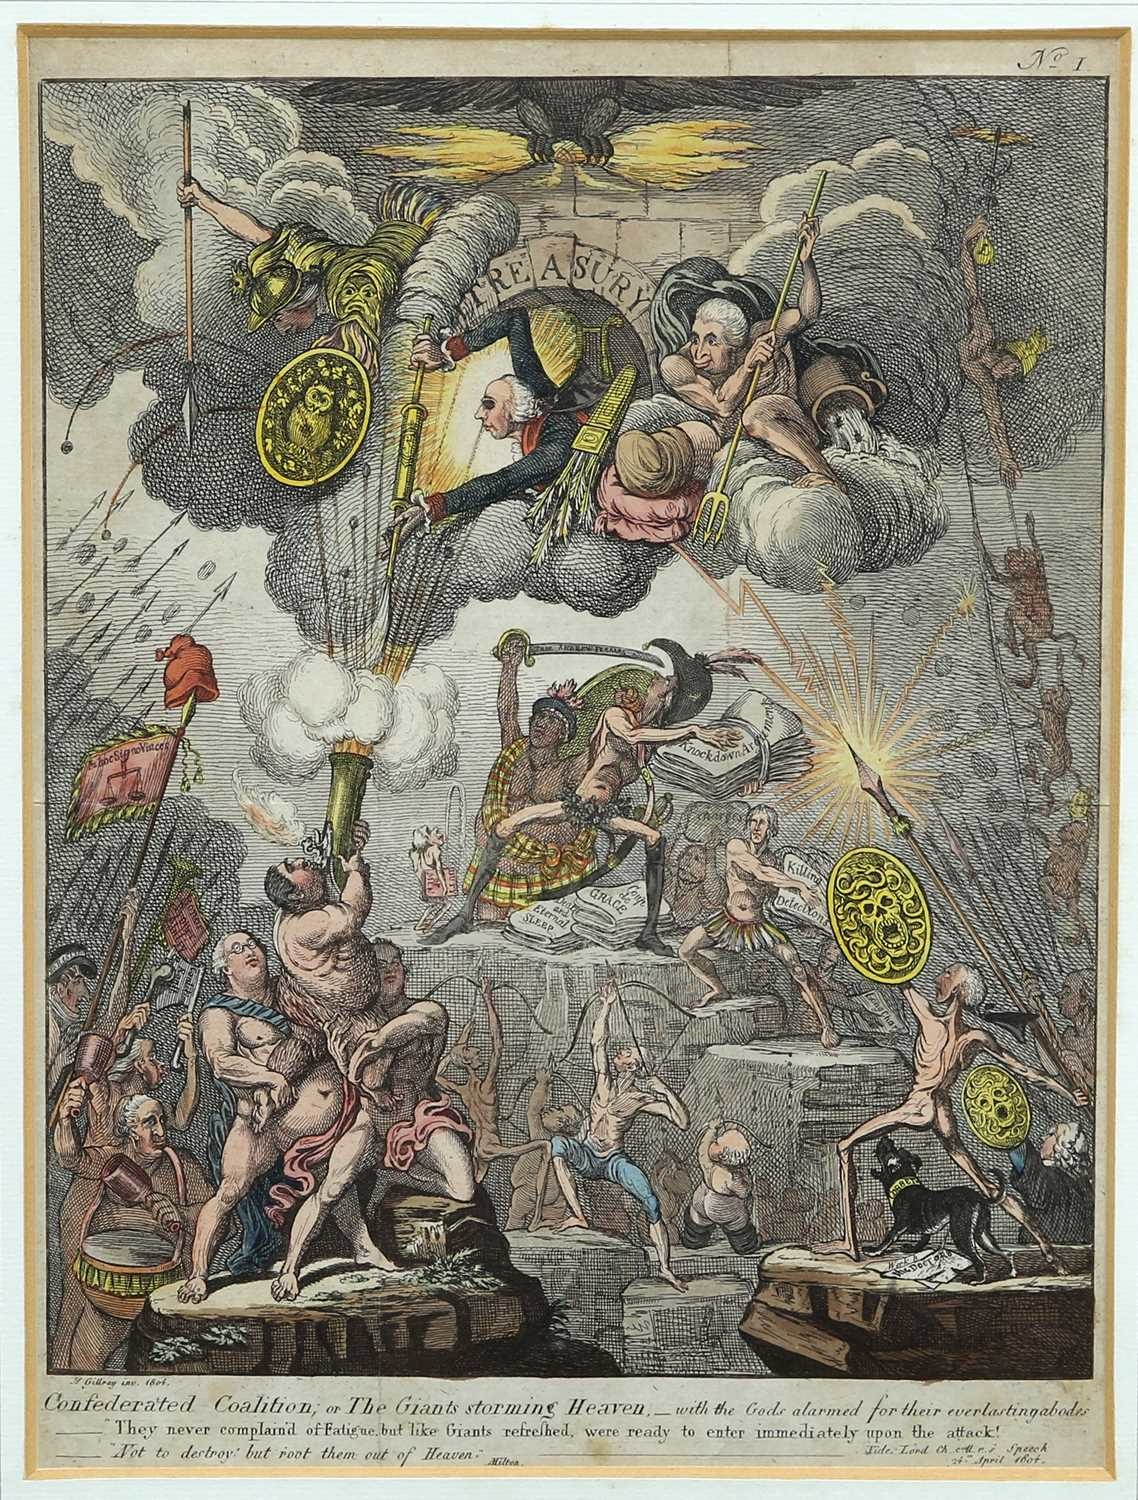 CONFEDERATED COALITION OF THE GIANTS STORMING HEAVEN by James Gillray